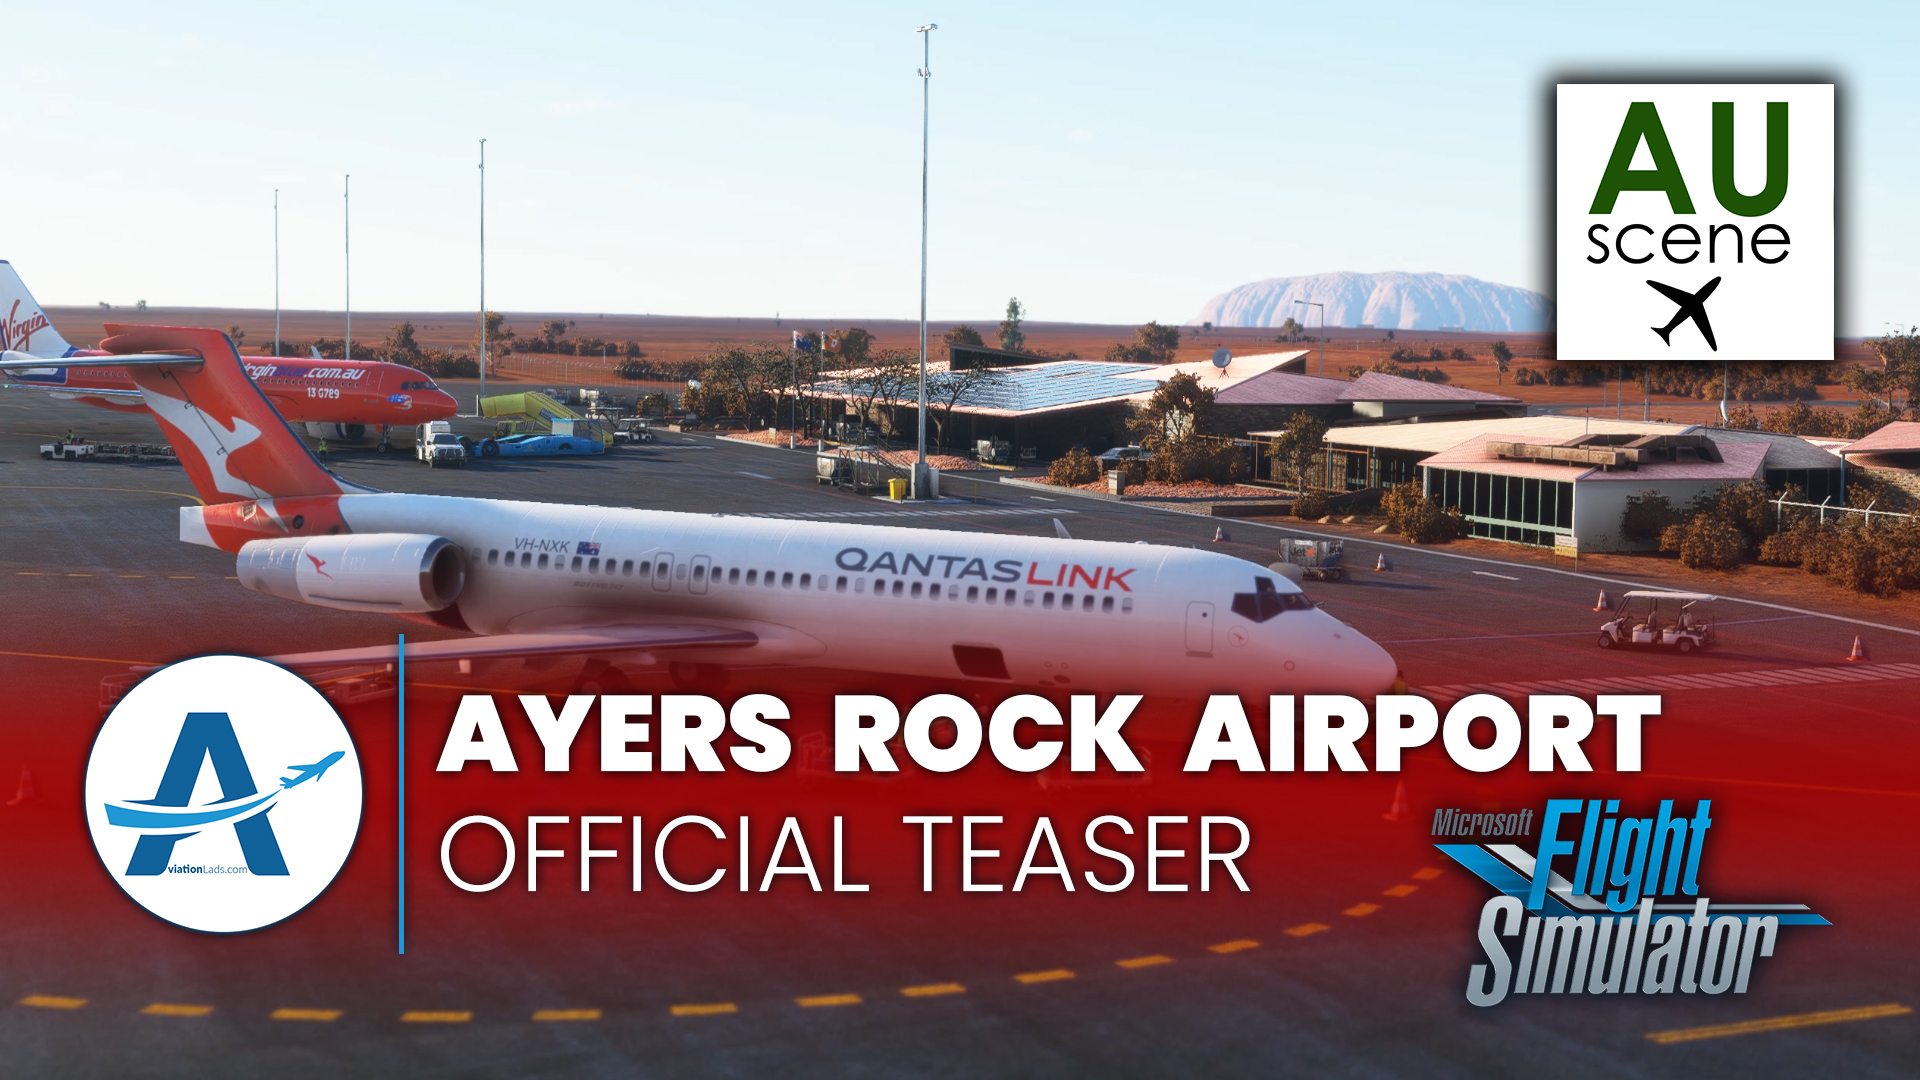 [TEASER] AUscene – Ayers Rock Airport